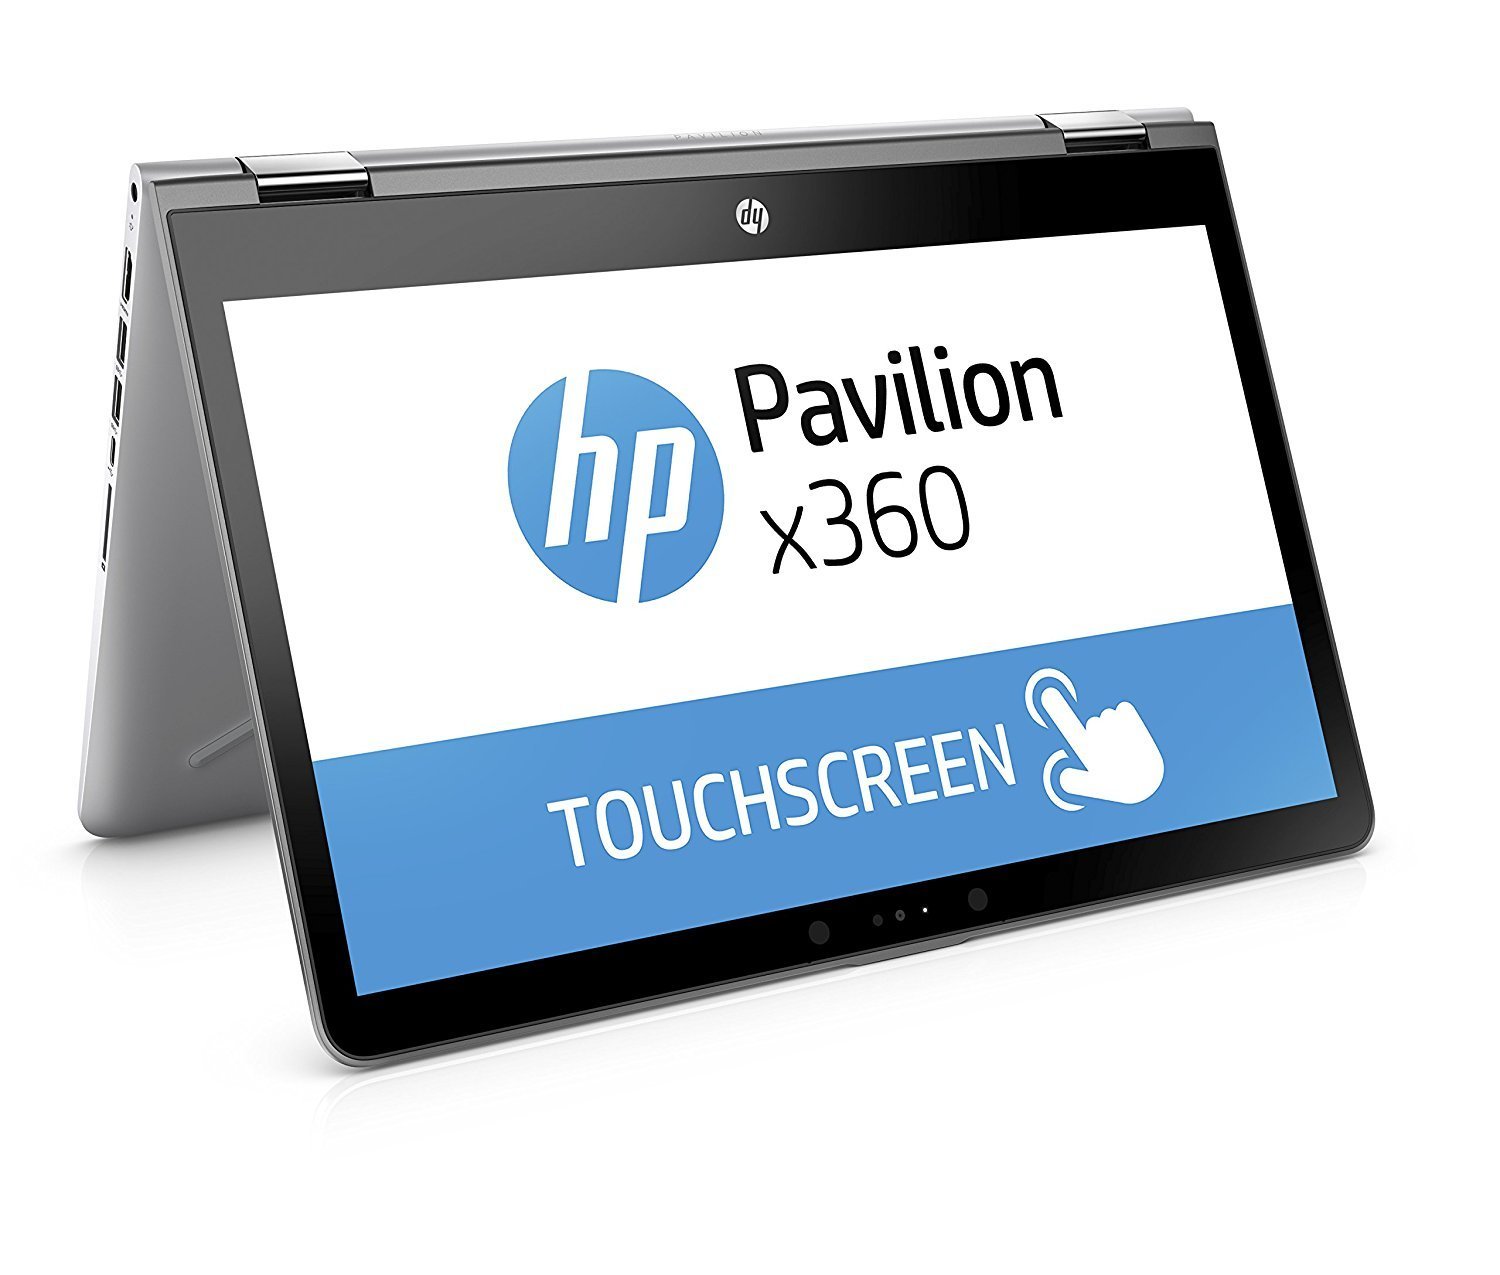 HP Pavilion x360 review: Modest 2-in-1 laptop good for basic